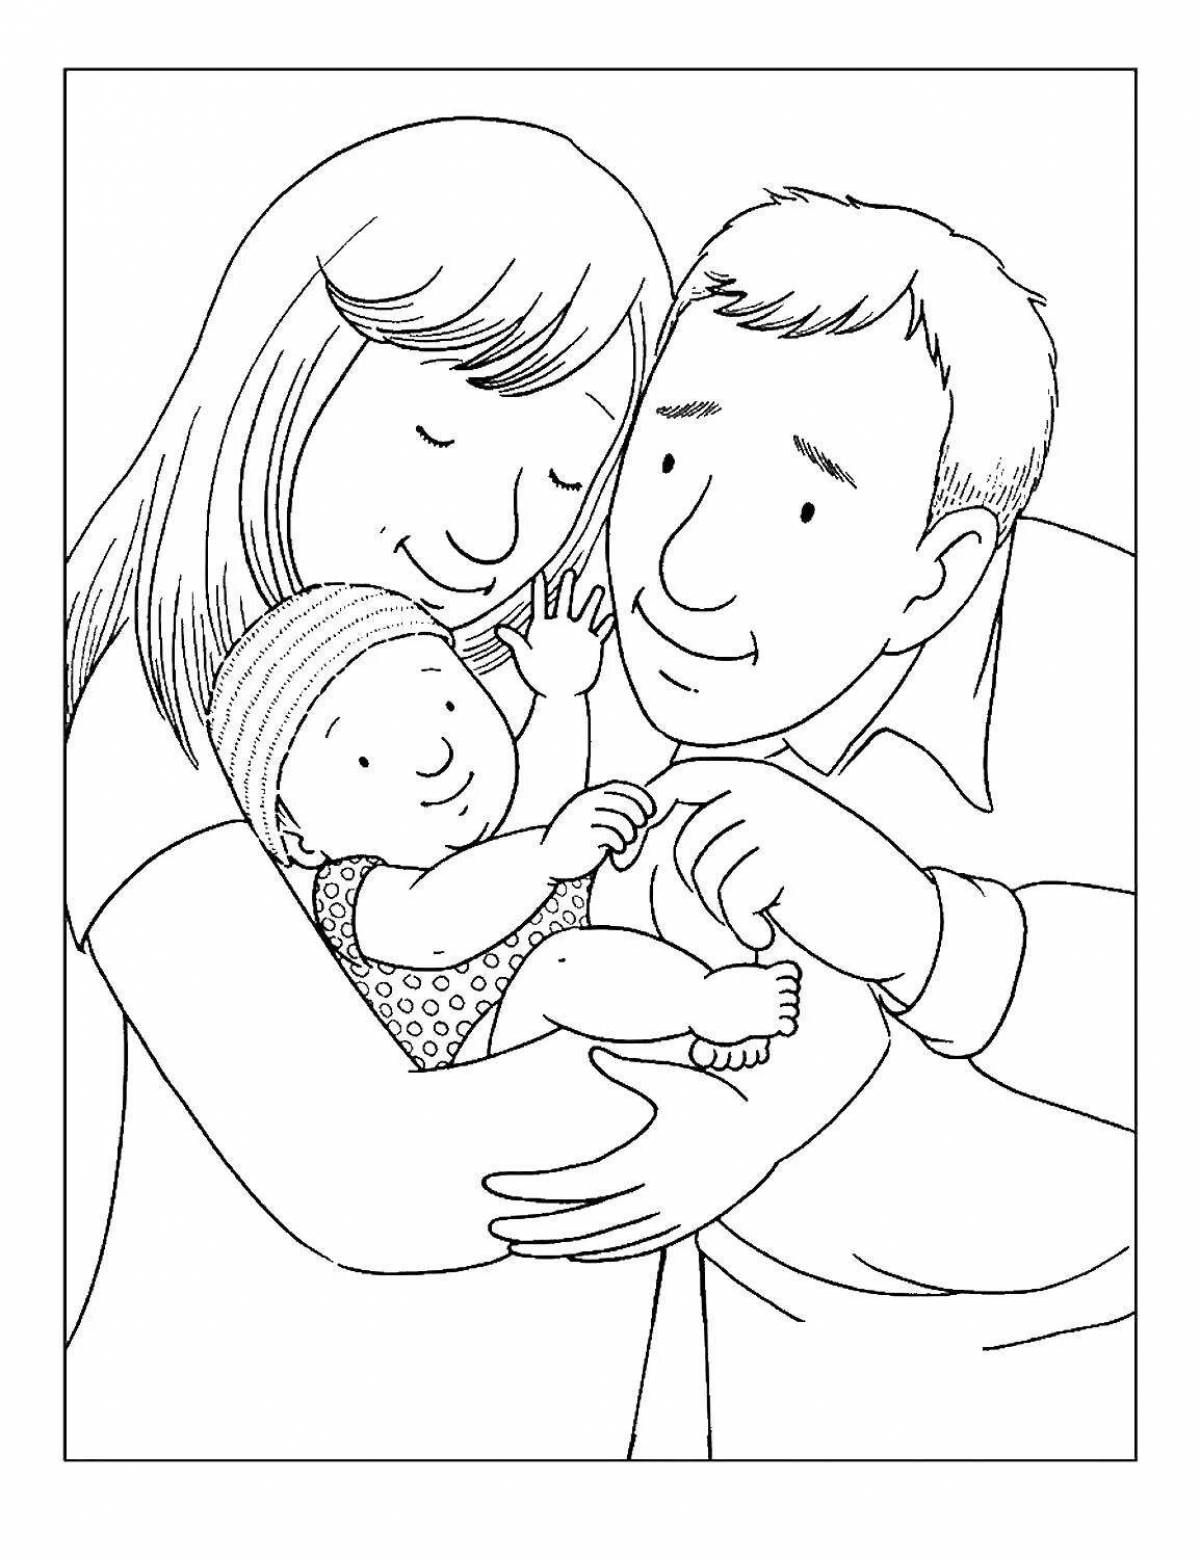 Joyful mom and dad coloring pages for kids